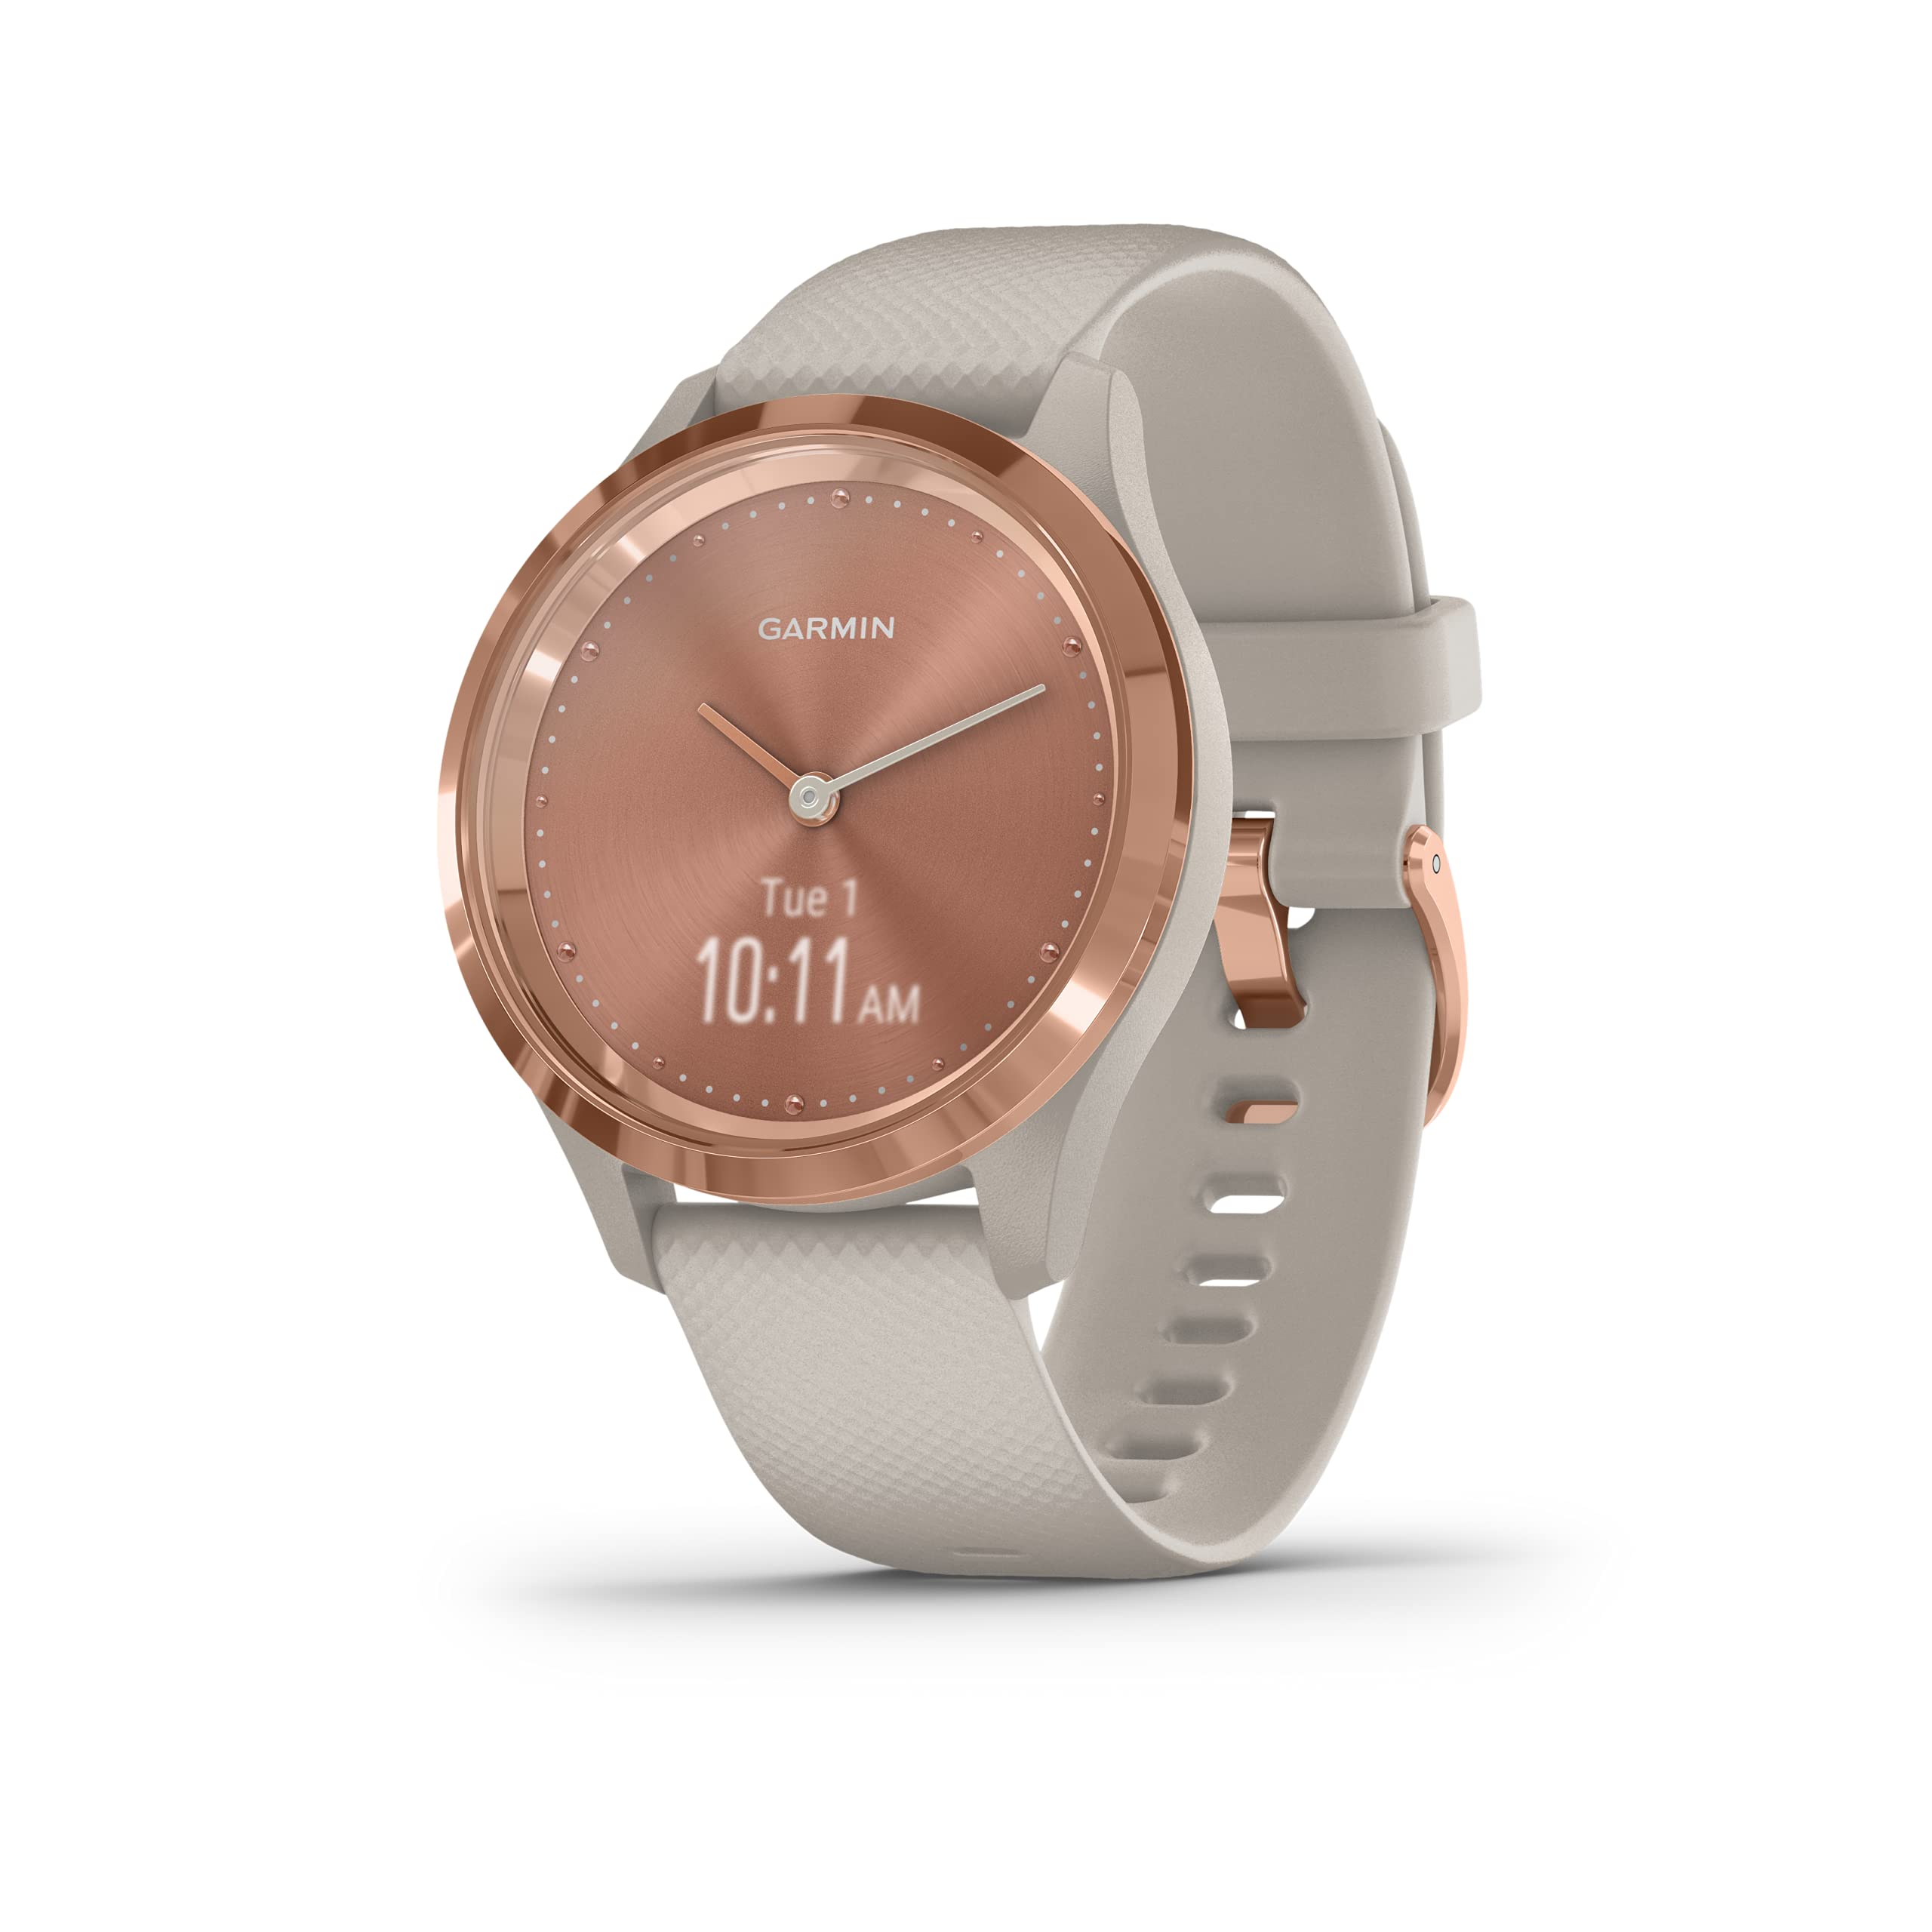 Garmin vivomove 3S, Smaller sized, Hybrid Connected GPS Smartwatch with Real Watch Hands and Hidden Touchscreen Display, Rose Gold with Light Sand Silicone Band